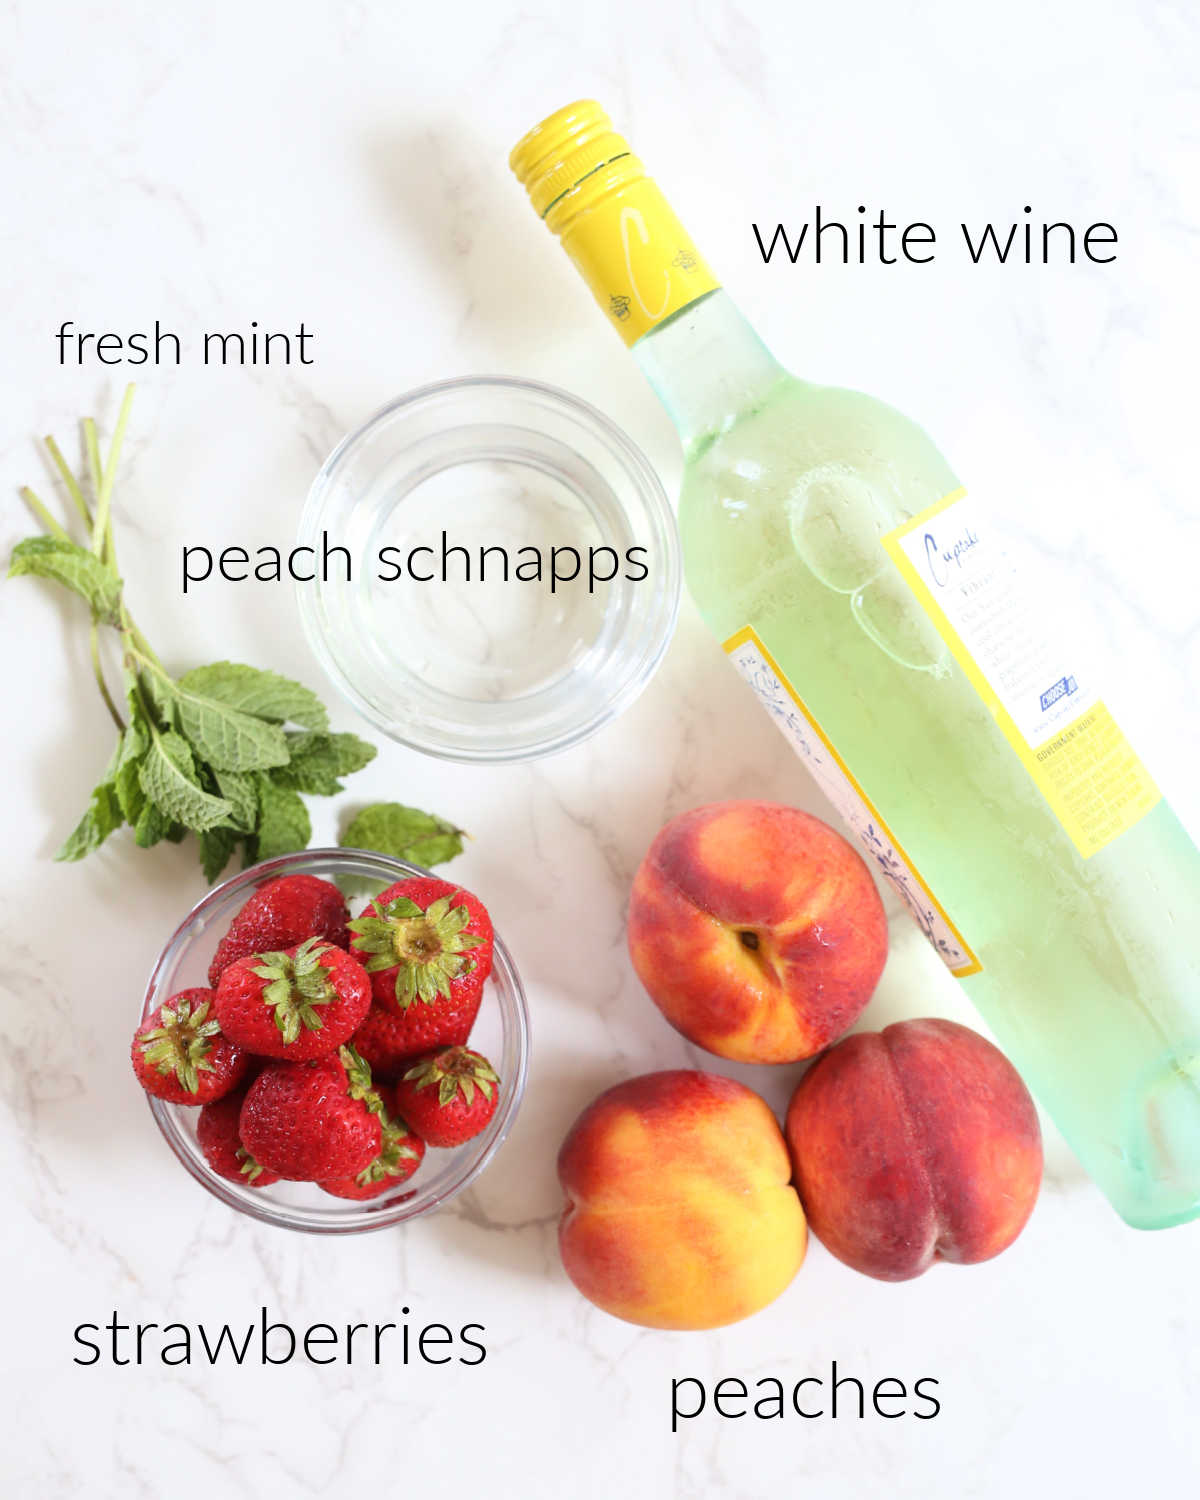 Ingredients of peaches, strawberries, white wine, peach schnapps, mint for sangria cocktail.